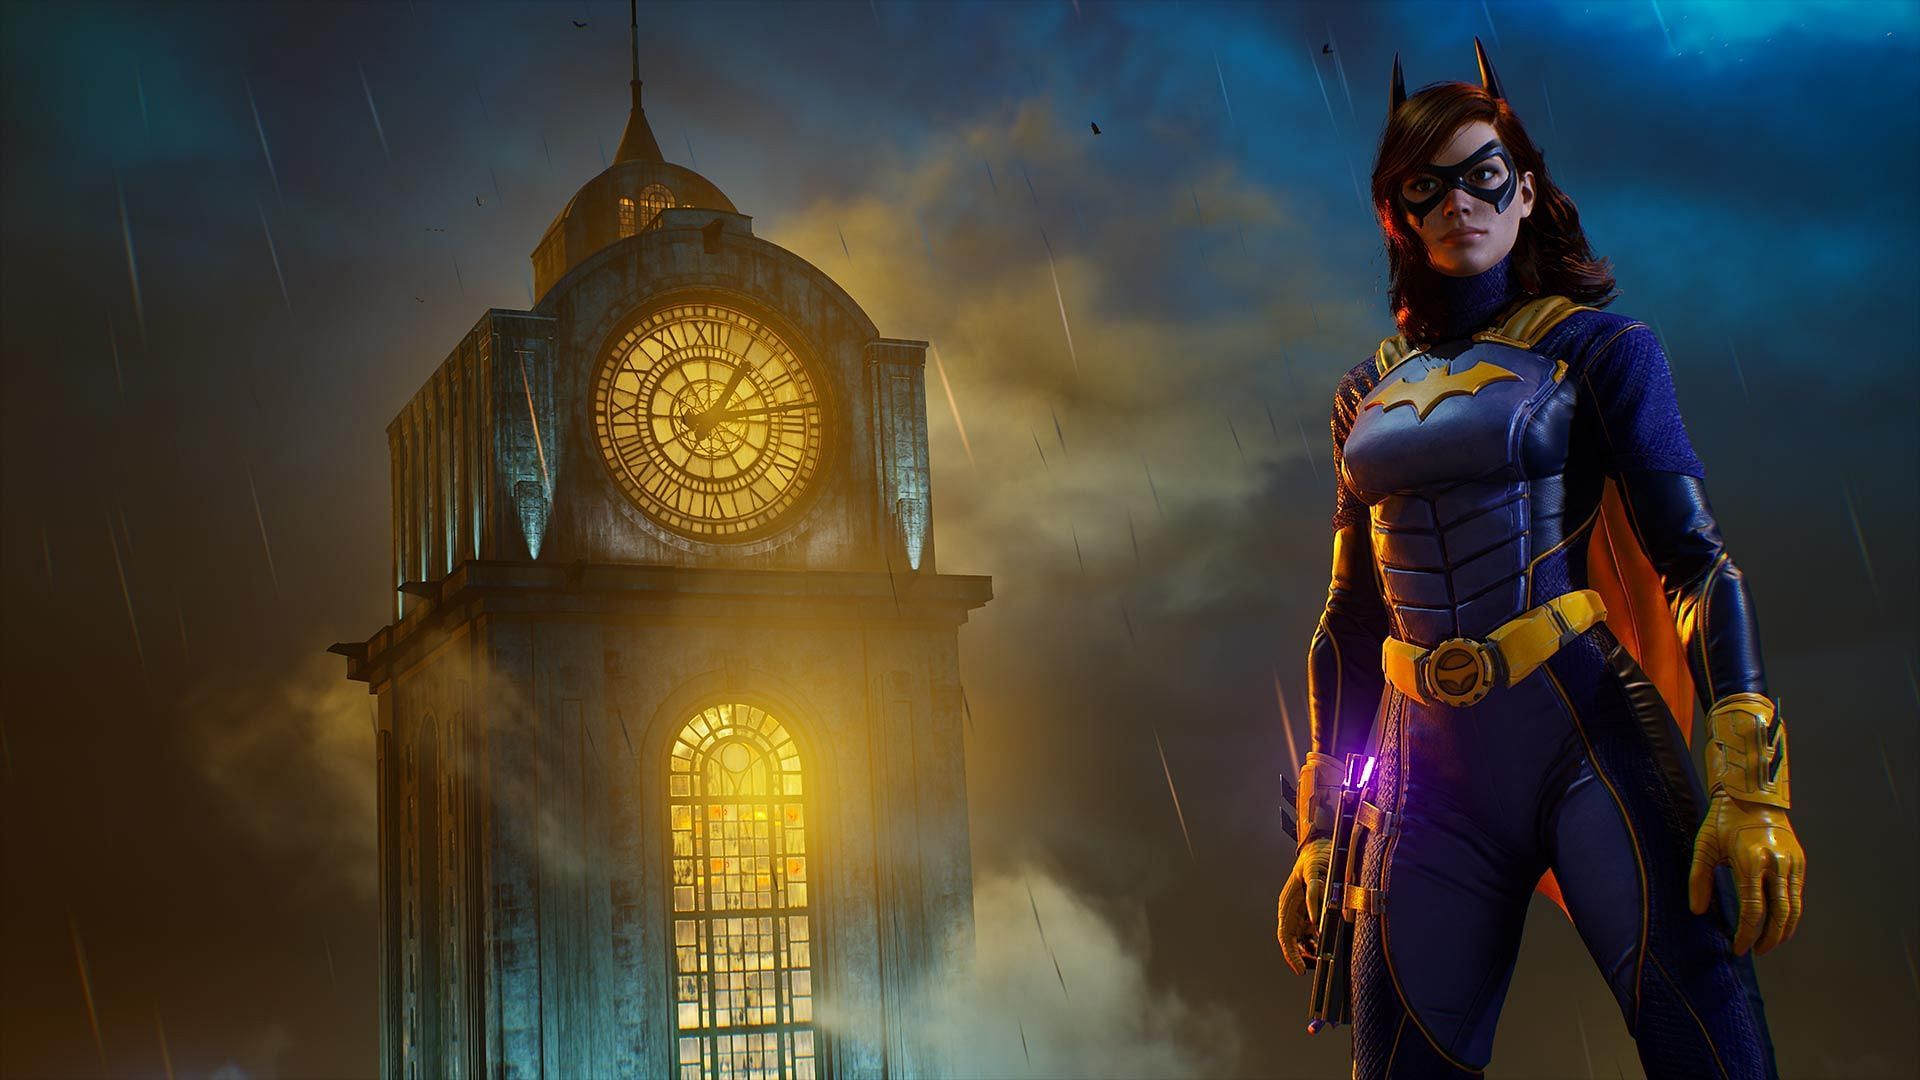 Batgirl is one of the four characters players can pick up and play in Gotham Knights (Image via Warner Bros. Games)